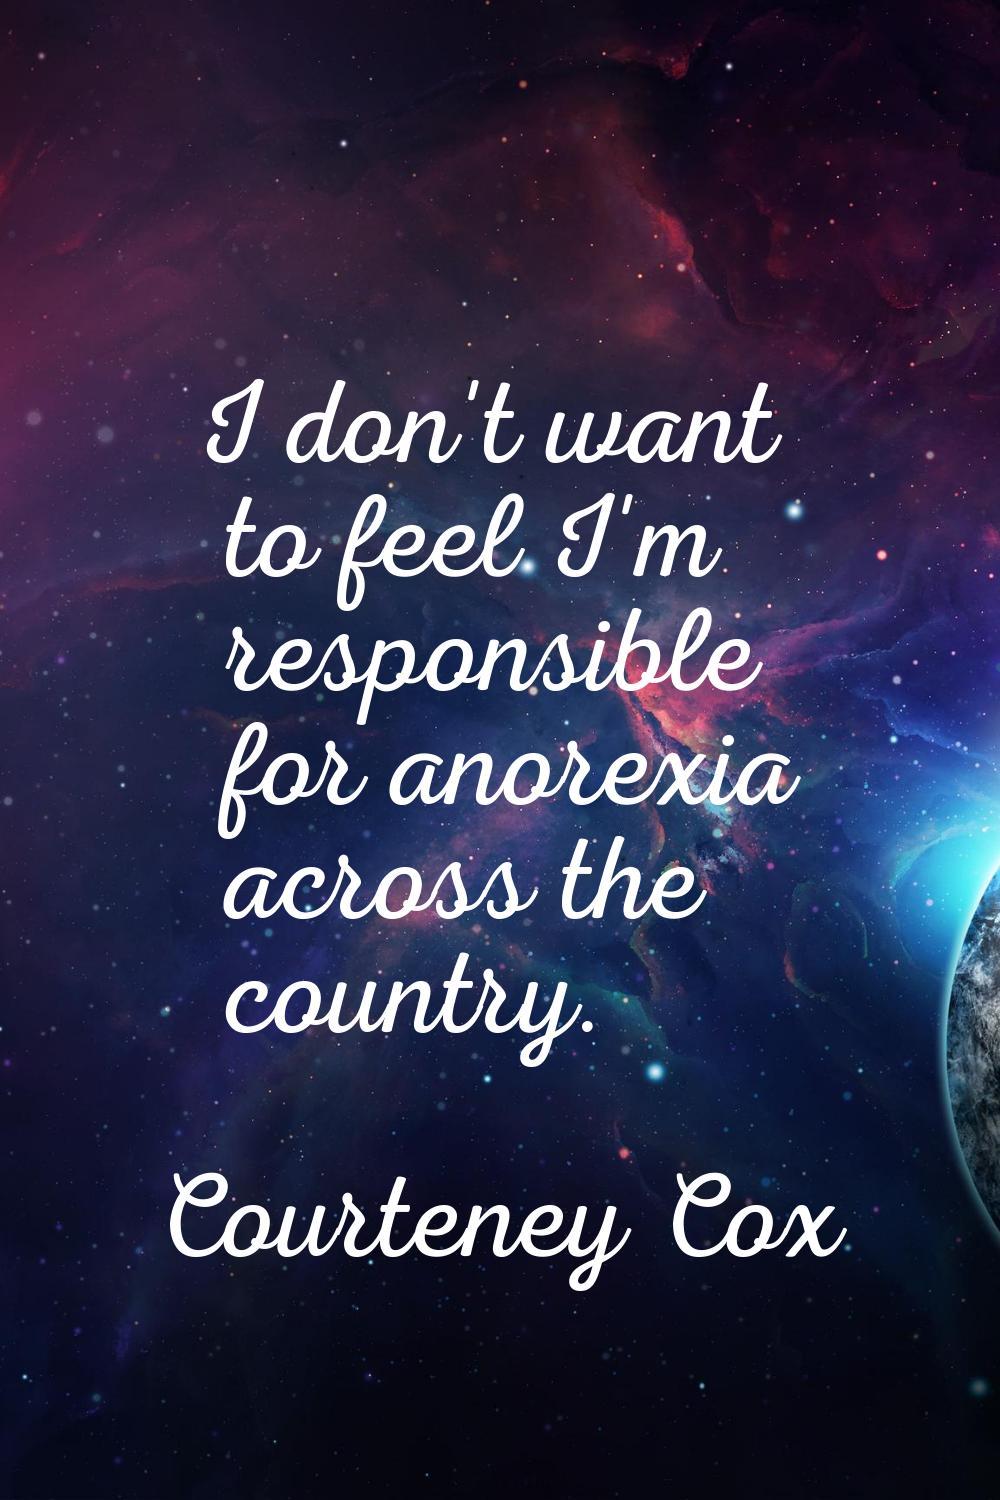 I don't want to feel I'm responsible for anorexia across the country.